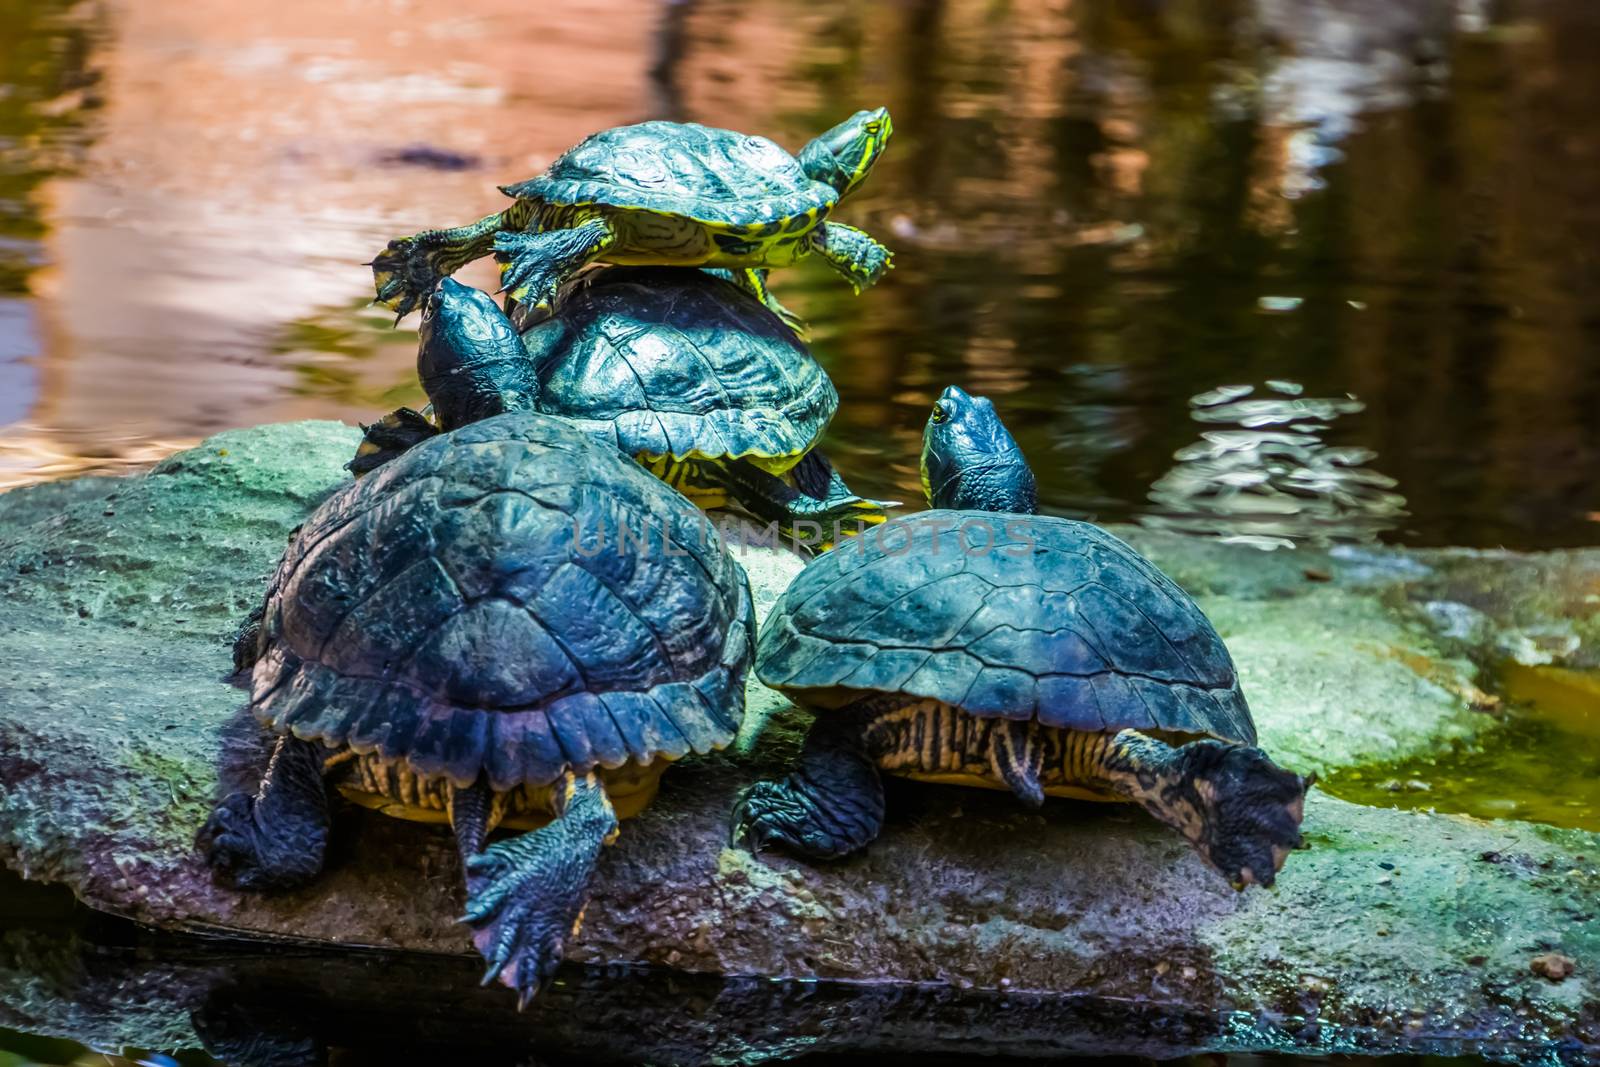 closeup of a cumberland slider turtle couple from the back at the water side together, tropical reptile specie from America